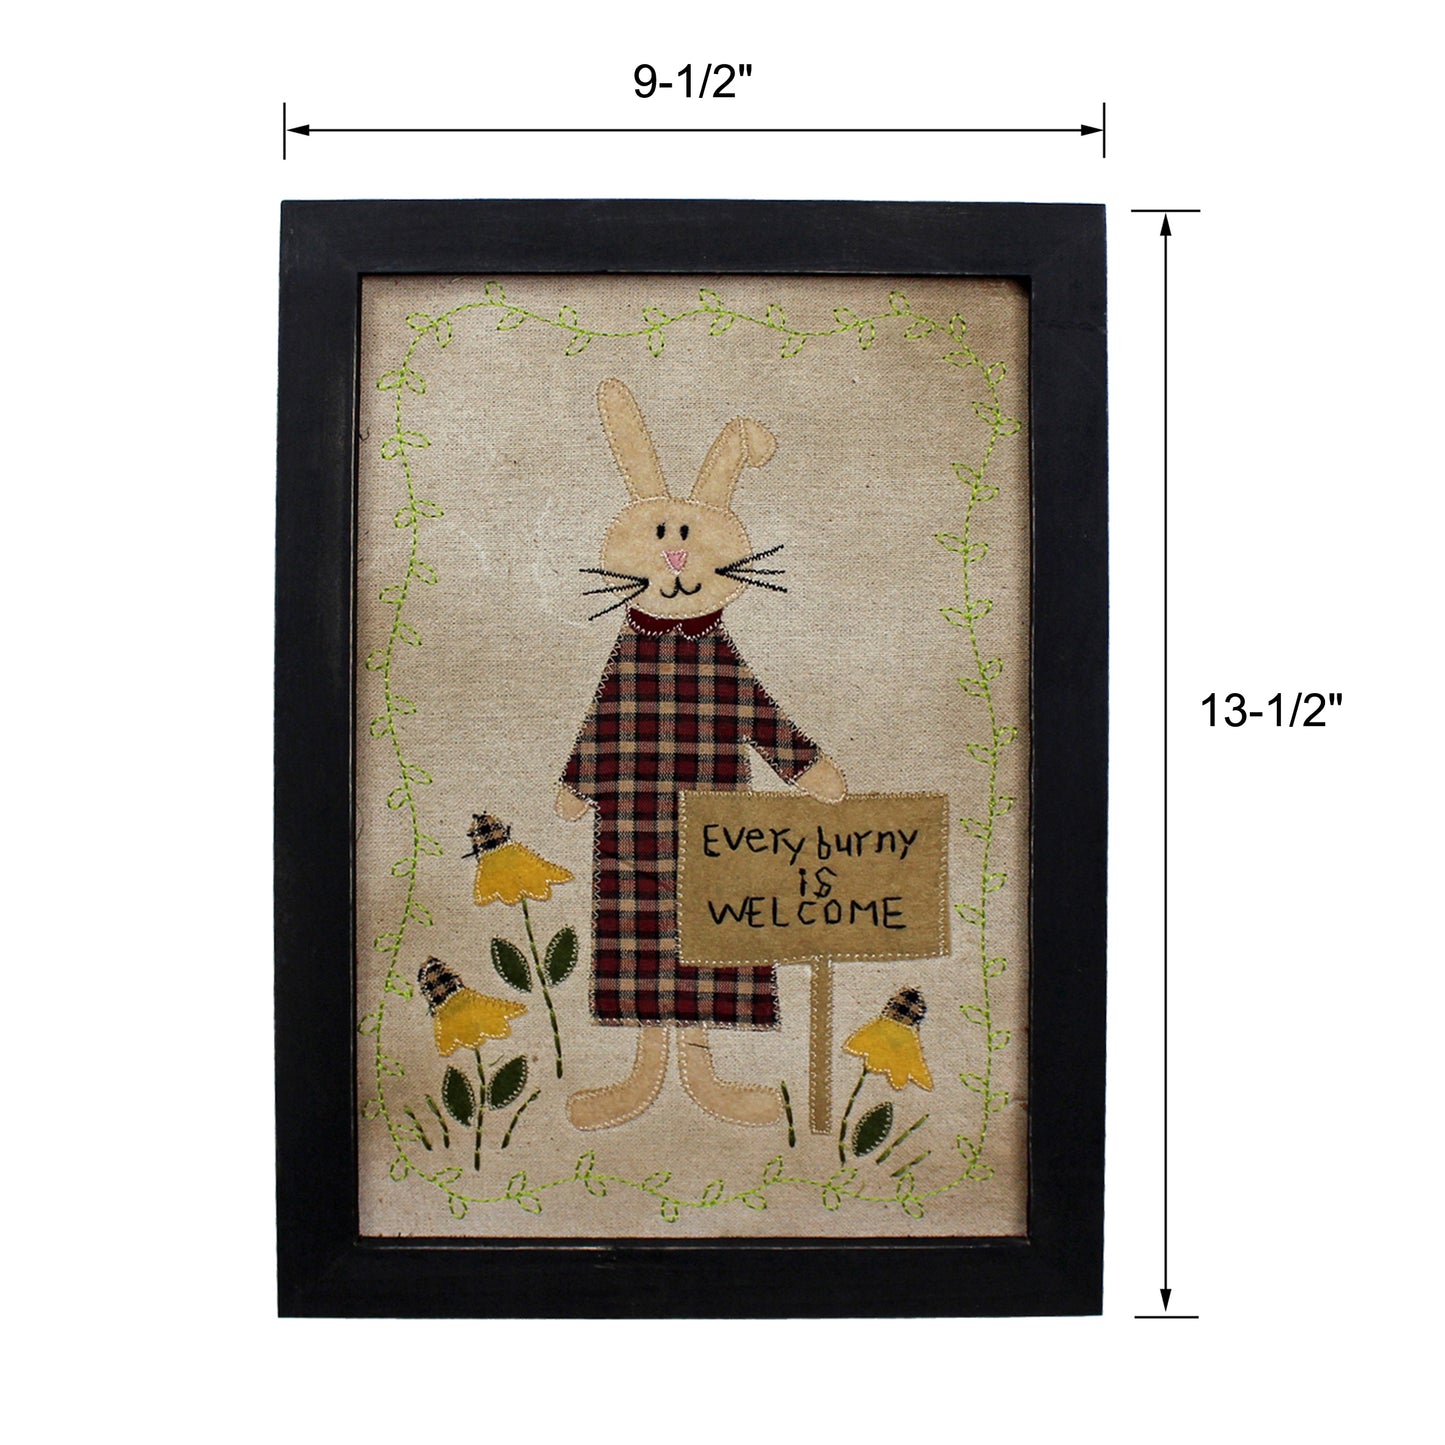 CVHOMEDECO. Primitives Vintage Every burny is Welcome Stitchery Frame Wall Mounted Hanging Decor Art, 9.5 x 13.5 Inch